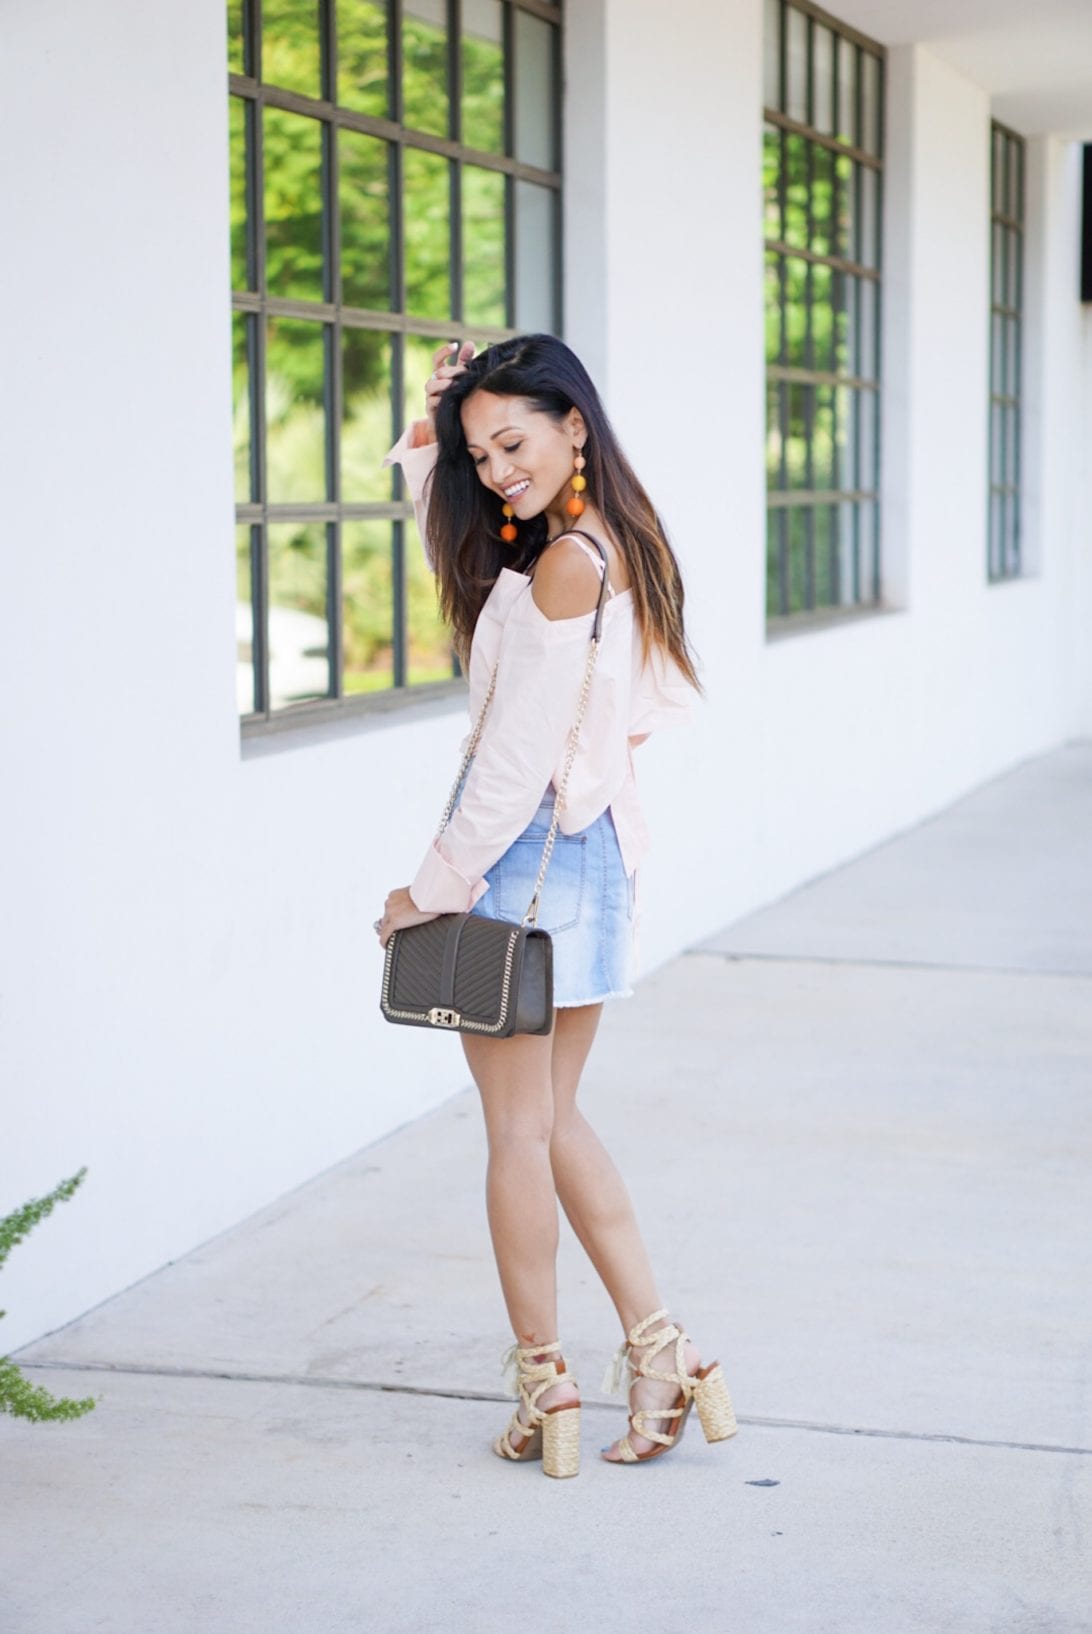 LONG SLEEVE COLD SHOULDER BUTTON UP WITH PLEATED OPEN BACK AND BOW DETAIL, PEACH, denim skirt, rebecca minkoff cross body bag, bauble ball earrings, mia heels